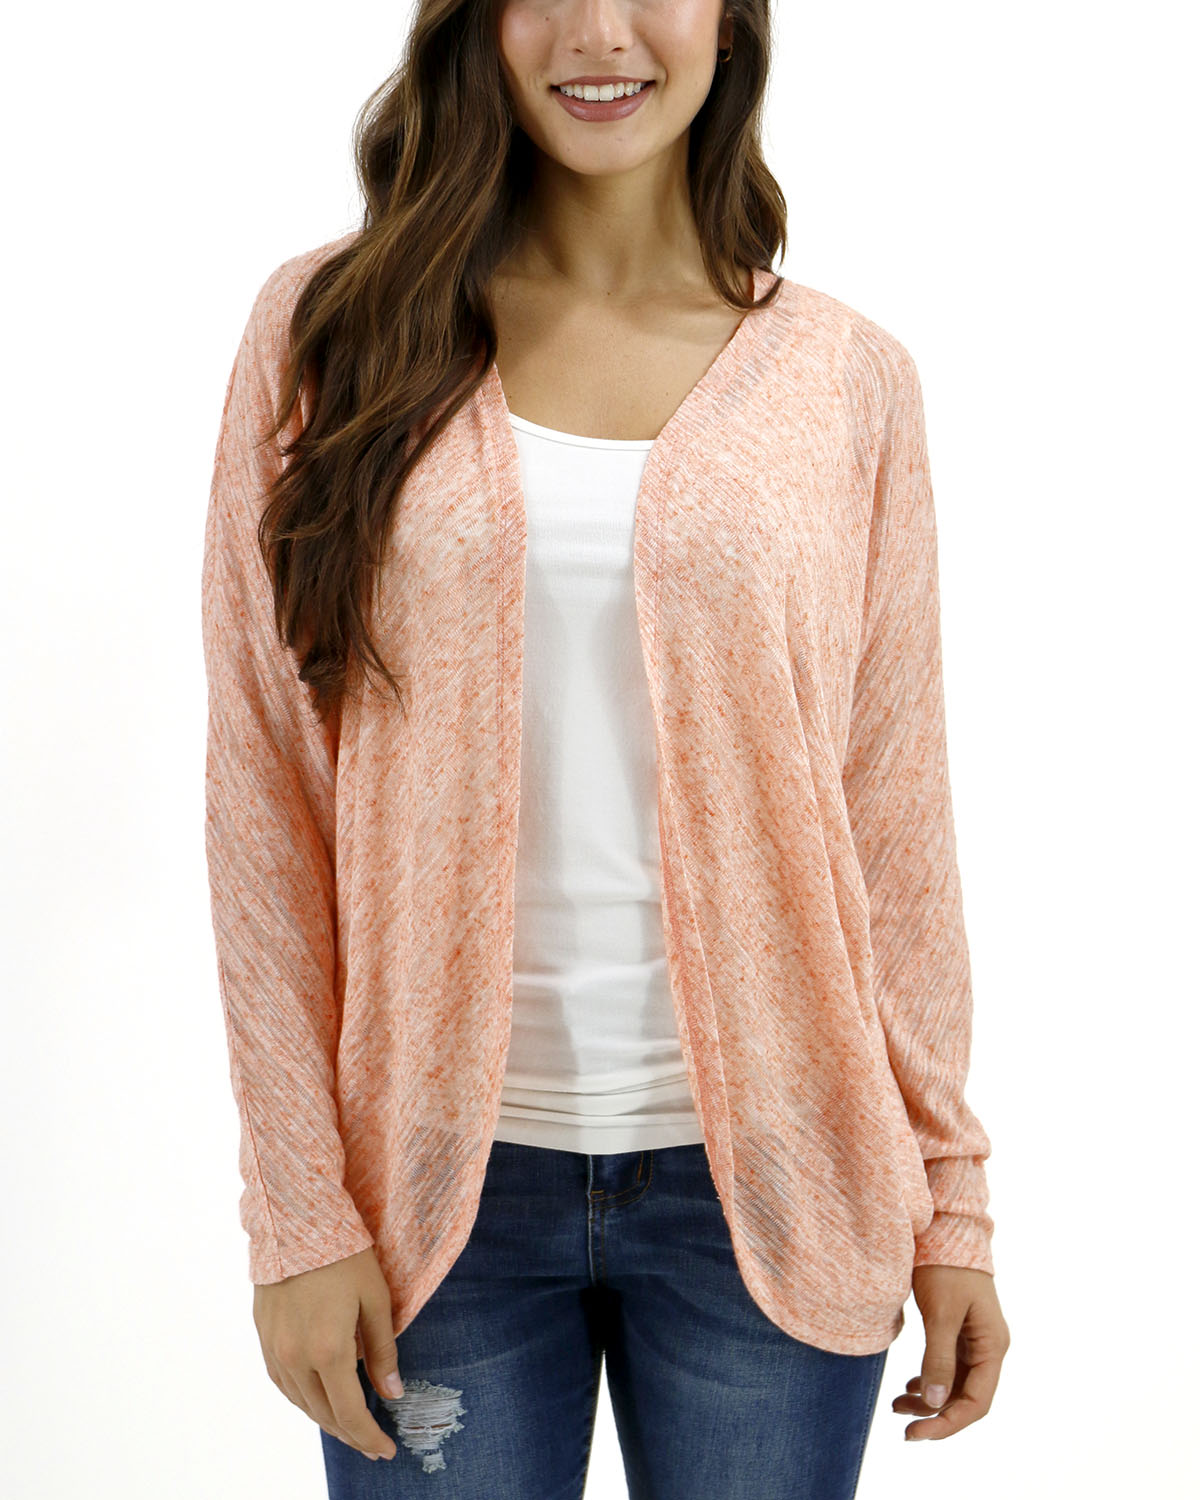 Cardigan Dreamsicle - and Slub in - SALE Cocoon Lace Grace FINAL Airy